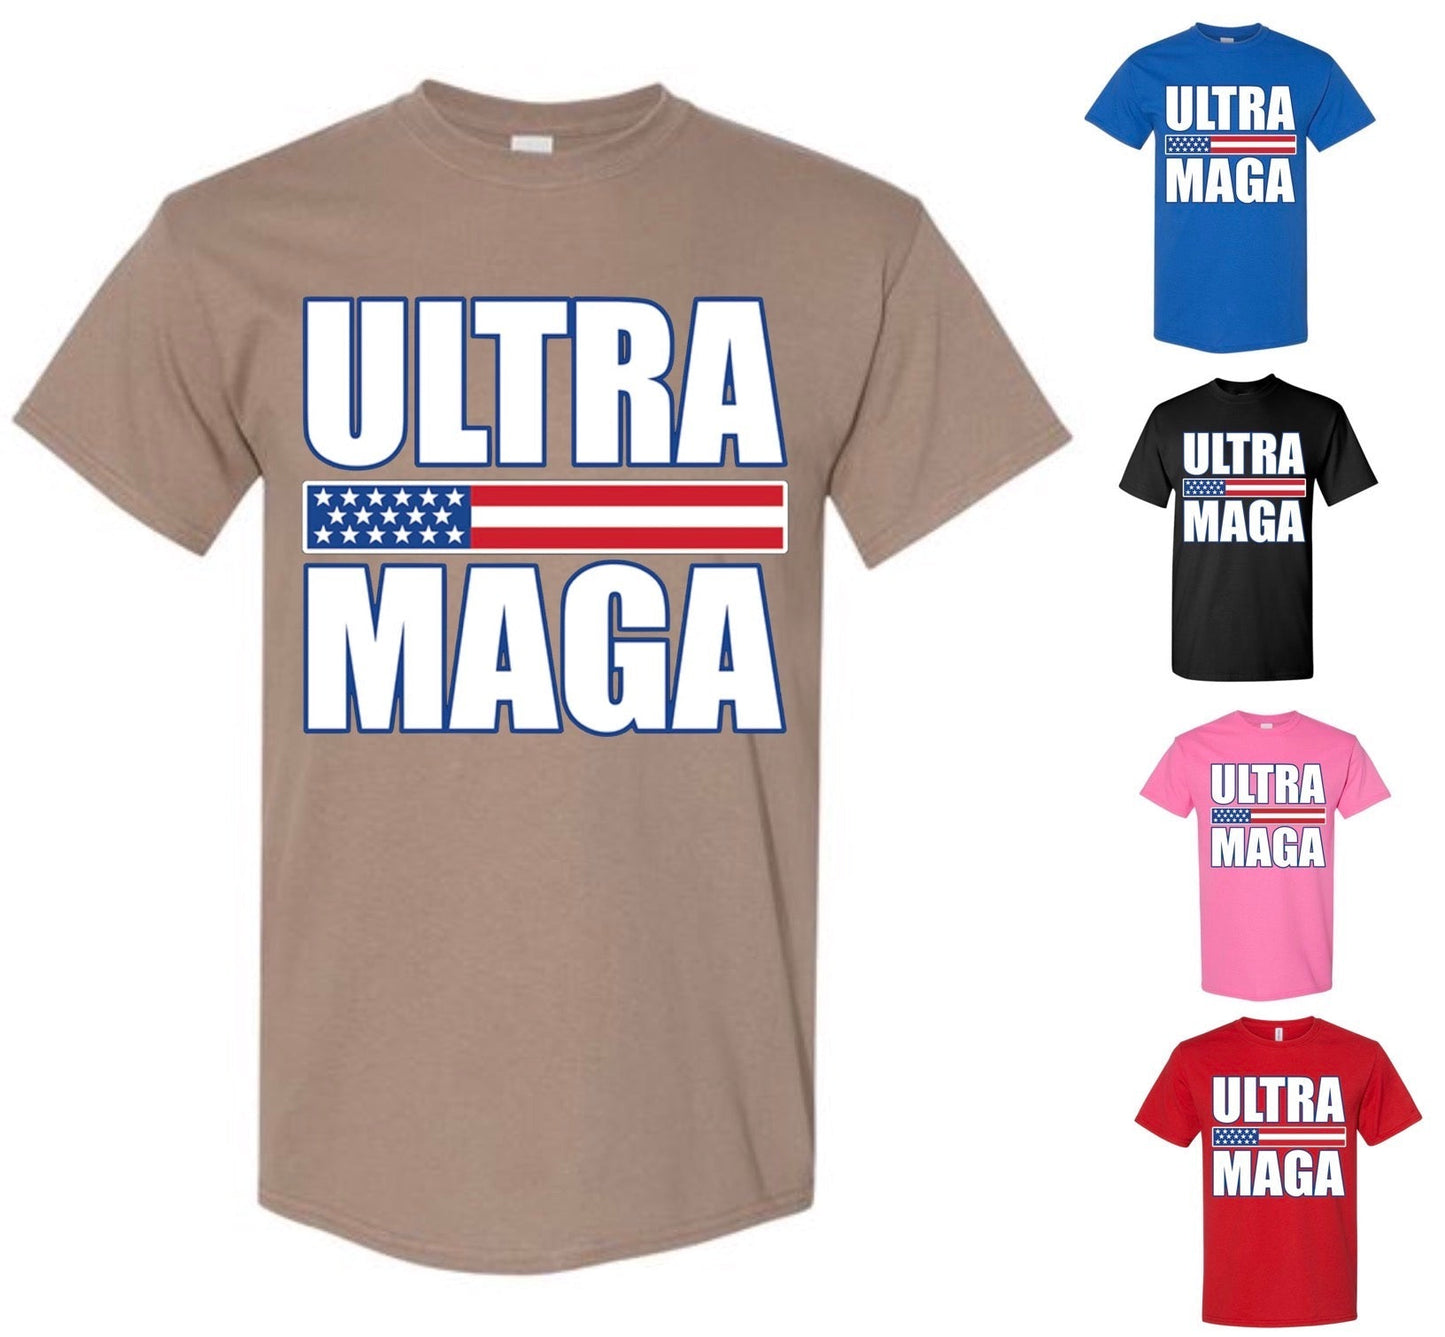 Ultra MAGA T-Shirt — 4th of July Special! (FREE Shipping)